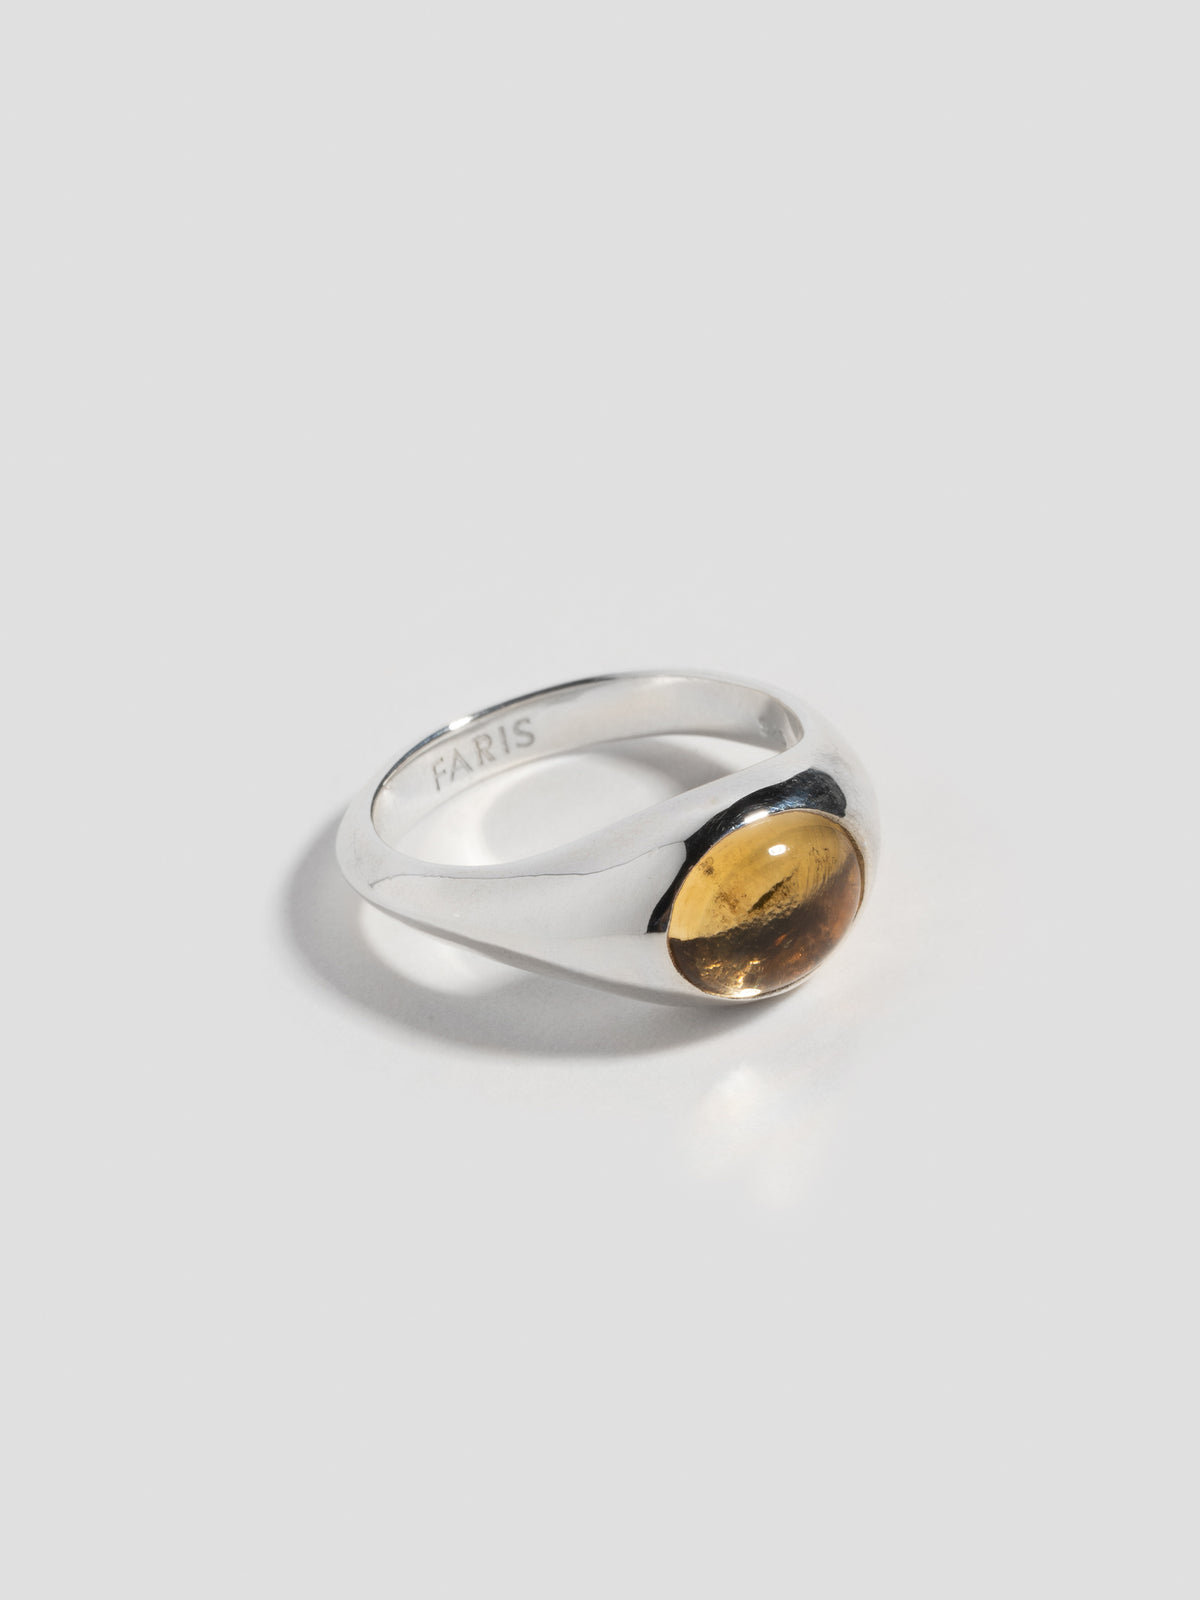 FARIS EYE Ring in sterling silver with citrine gem